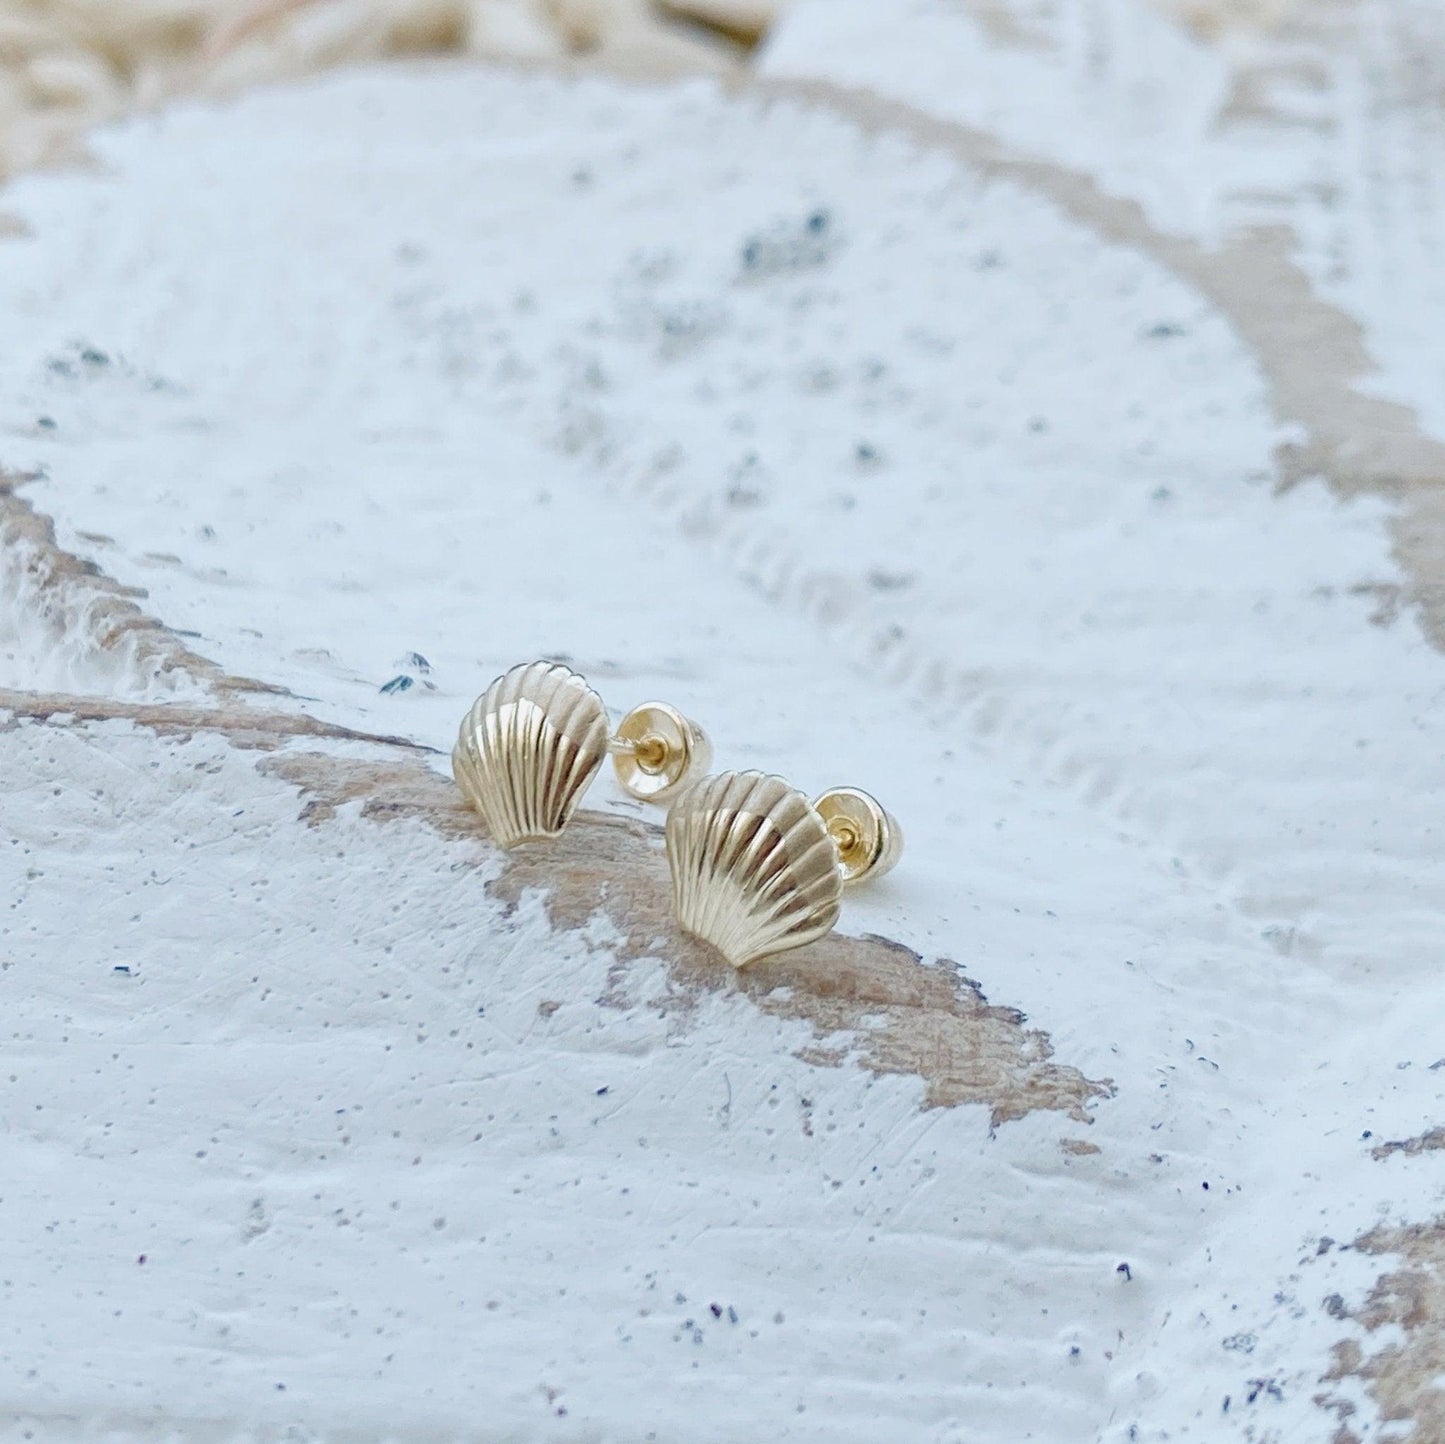 Load image into Gallery viewer, These seashell stud earrings are 10K gold plated and made with real sea shells. They are the perfect pair of everyday earrings, but also lovely enough to wear on your wedding day or at a formal event. Choose from a variety of colors and sizes. This is also a great gift for family and friends!
